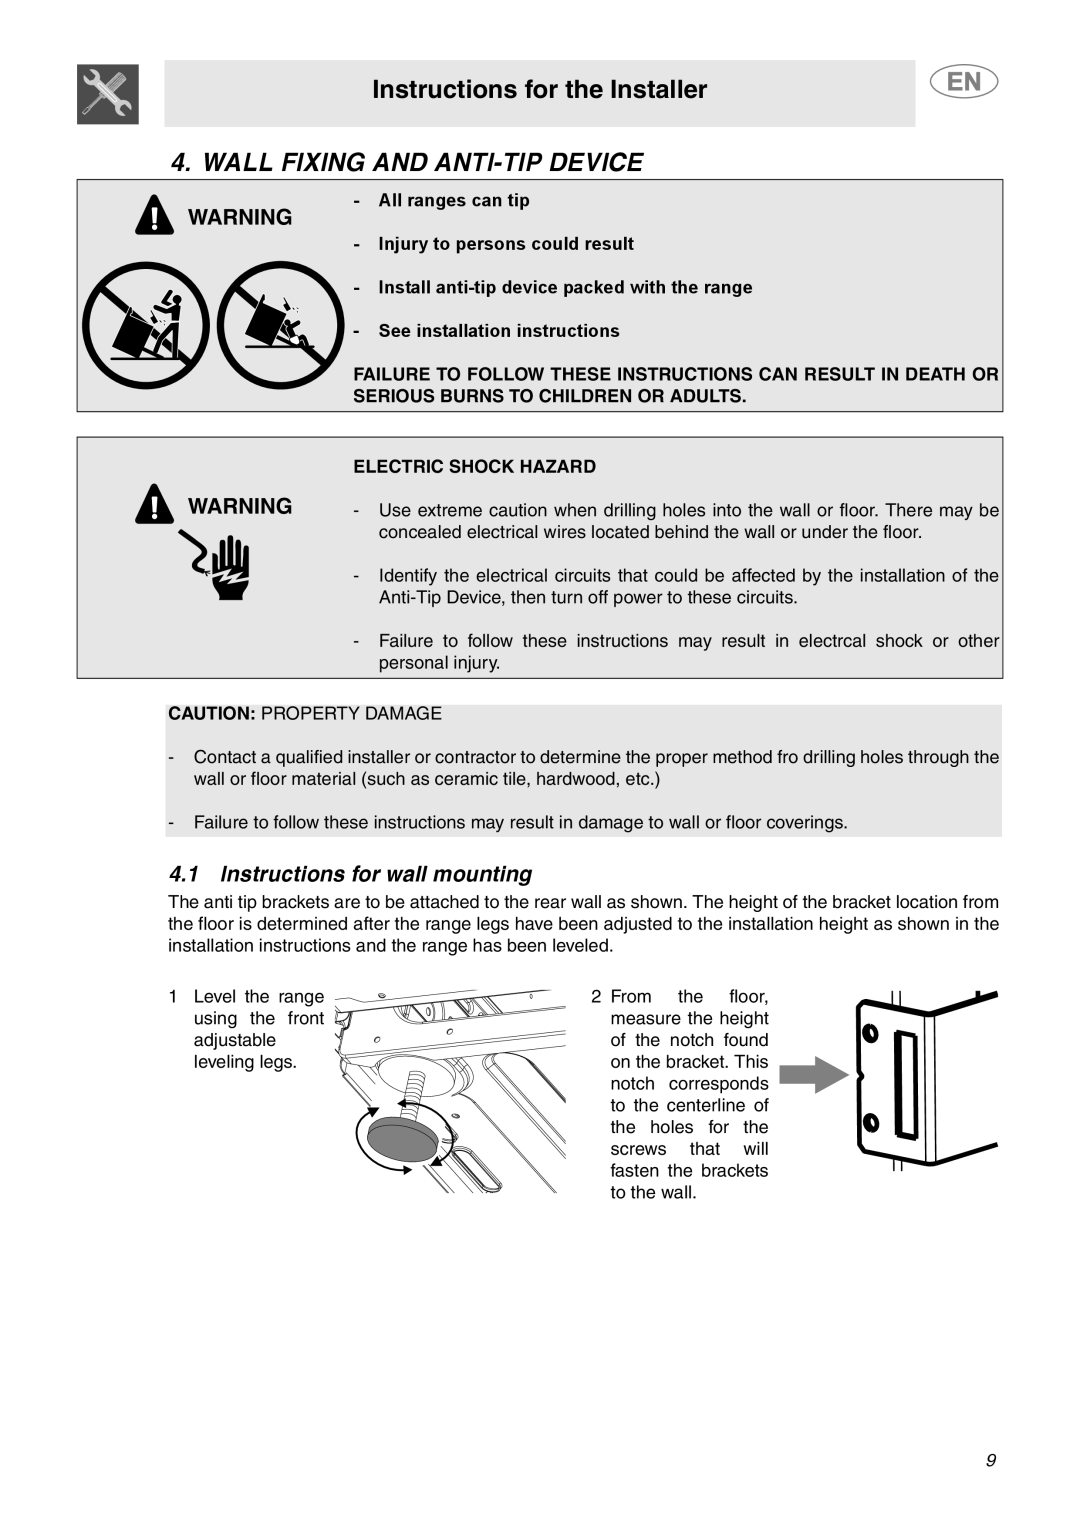 Smeg A1XCU6 Wall Fixing And Anti-Tipdevice, Instructions for wall mounting, Instructions for the Installer 